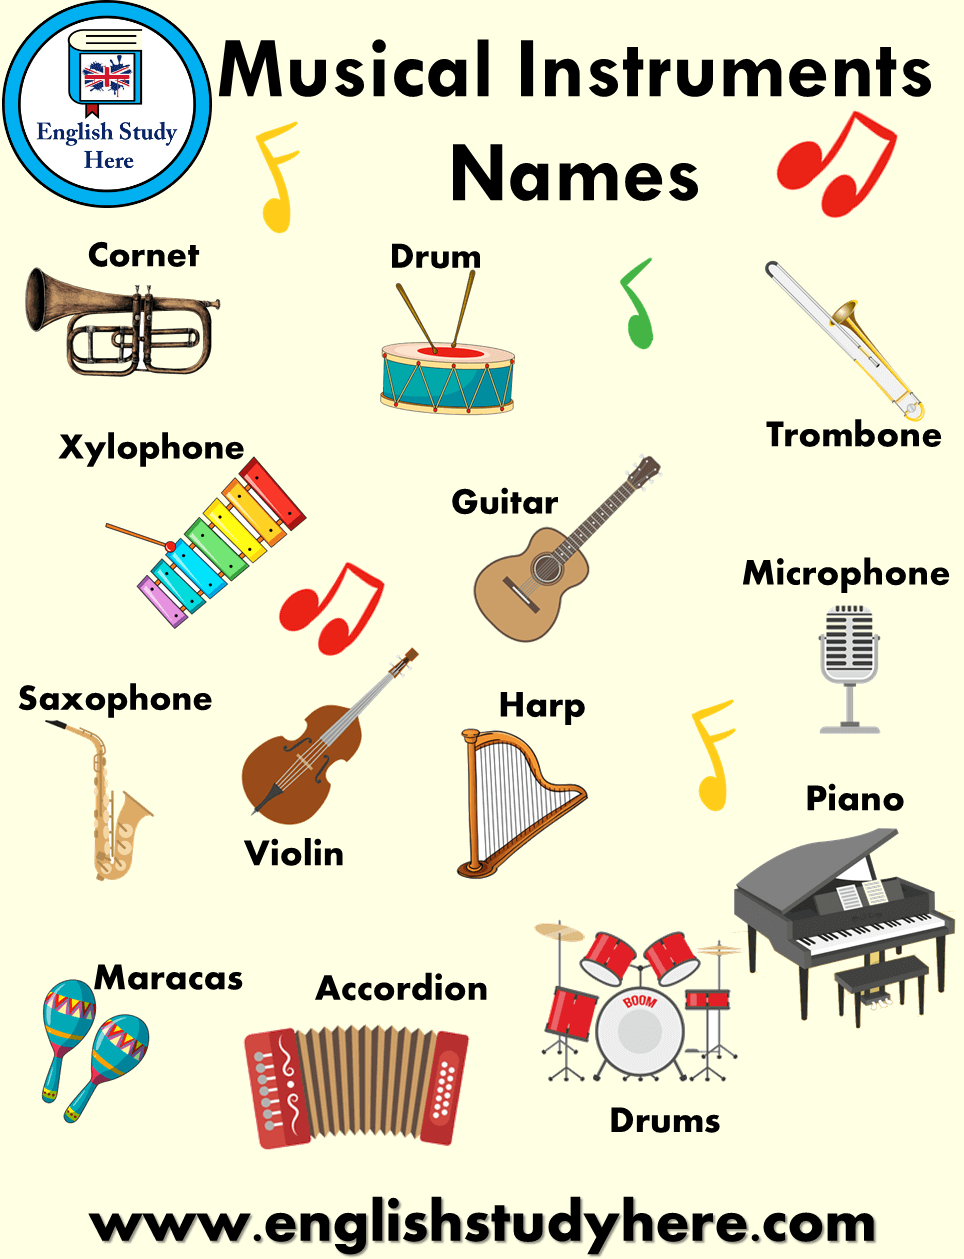 Musical Instruments Names and Pictures - English Study Here